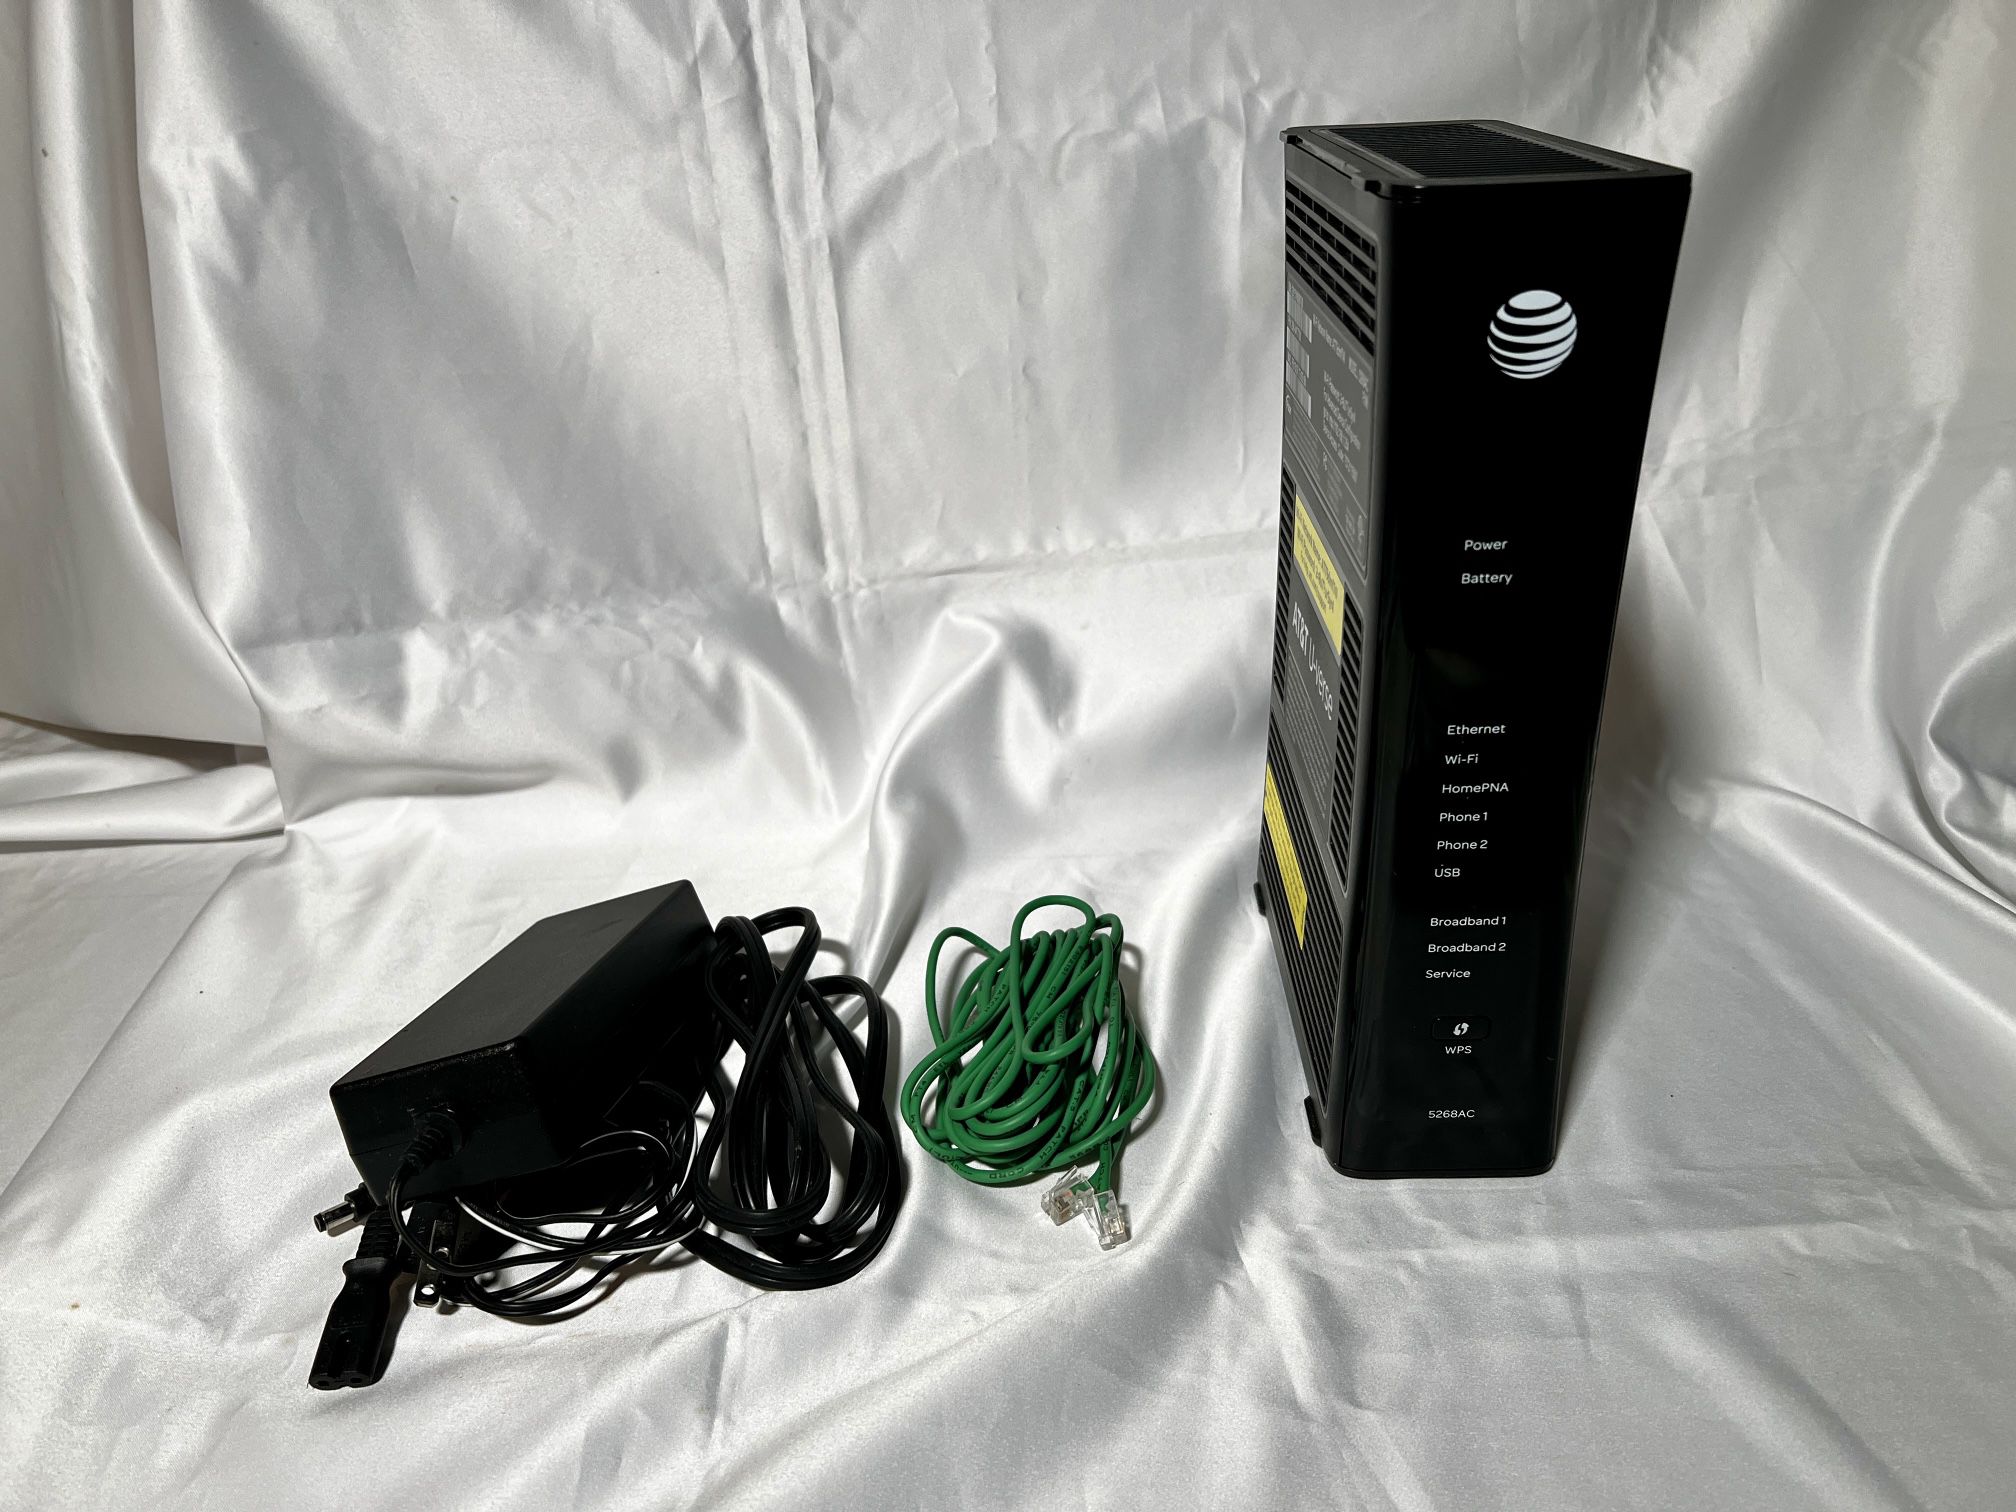 AT&T U-Verse Pace 5268AC Gateway Internet Wireless Modem Router With Power cable